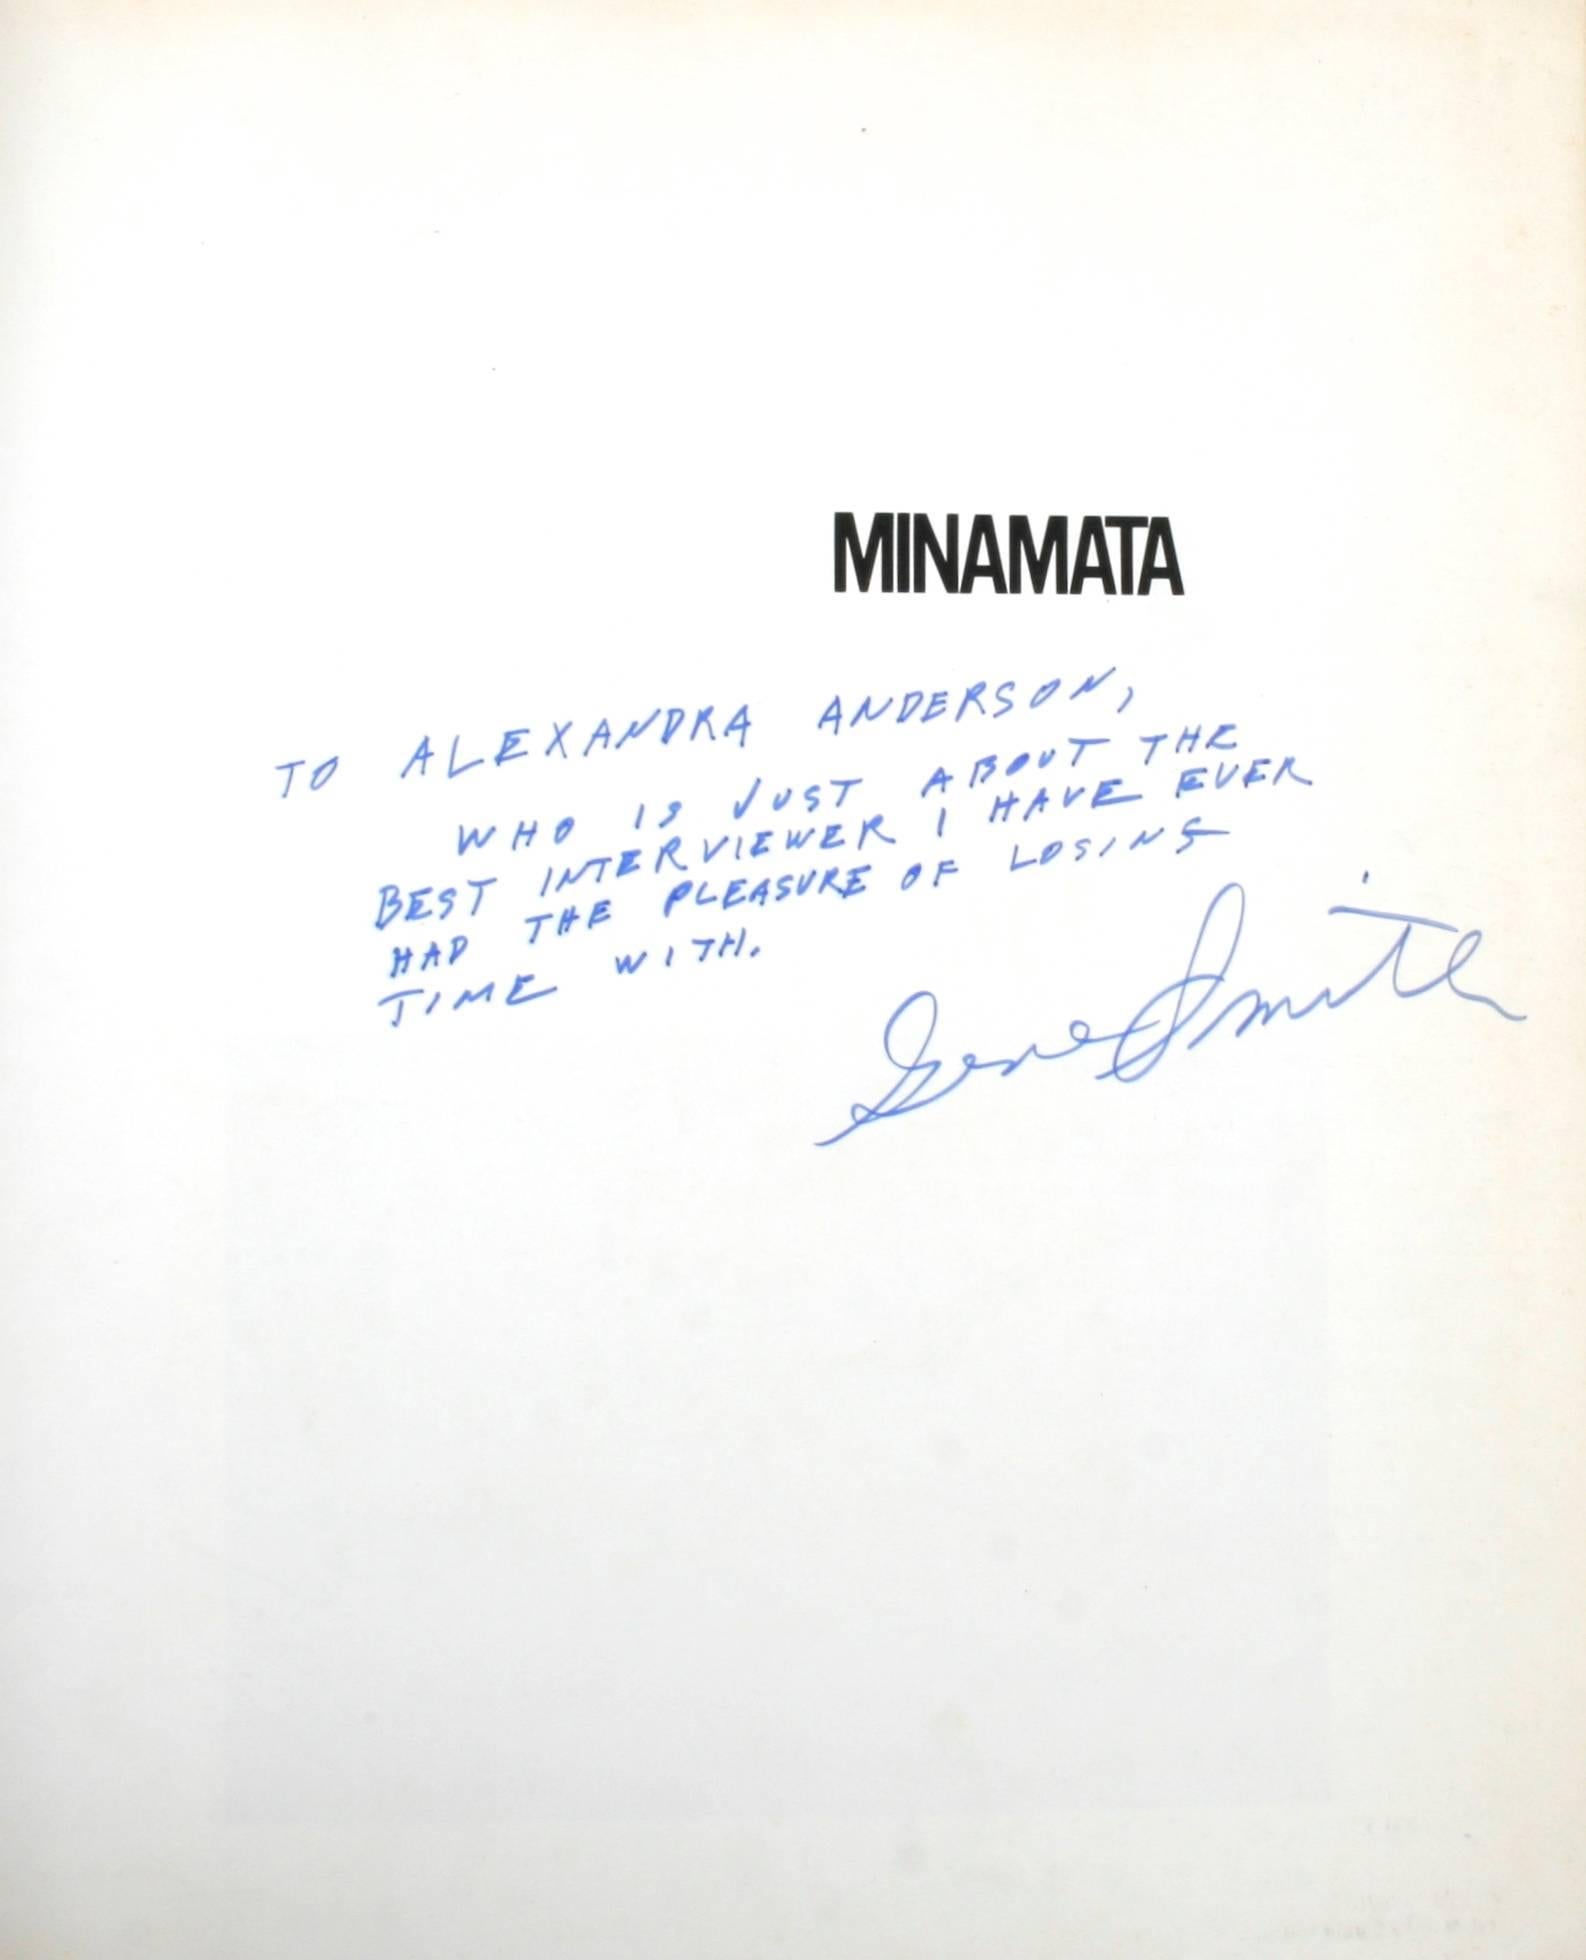 Minamata, Words and Photographs by W. Eugene Smith and Aileen M. Smith. New York: Holt, Rinehart and Winston, 1975. Signed and inscribed, stated first edition soft cover. 192pp. The portfolio and essays of Industrial methyl mercury poisoning of the